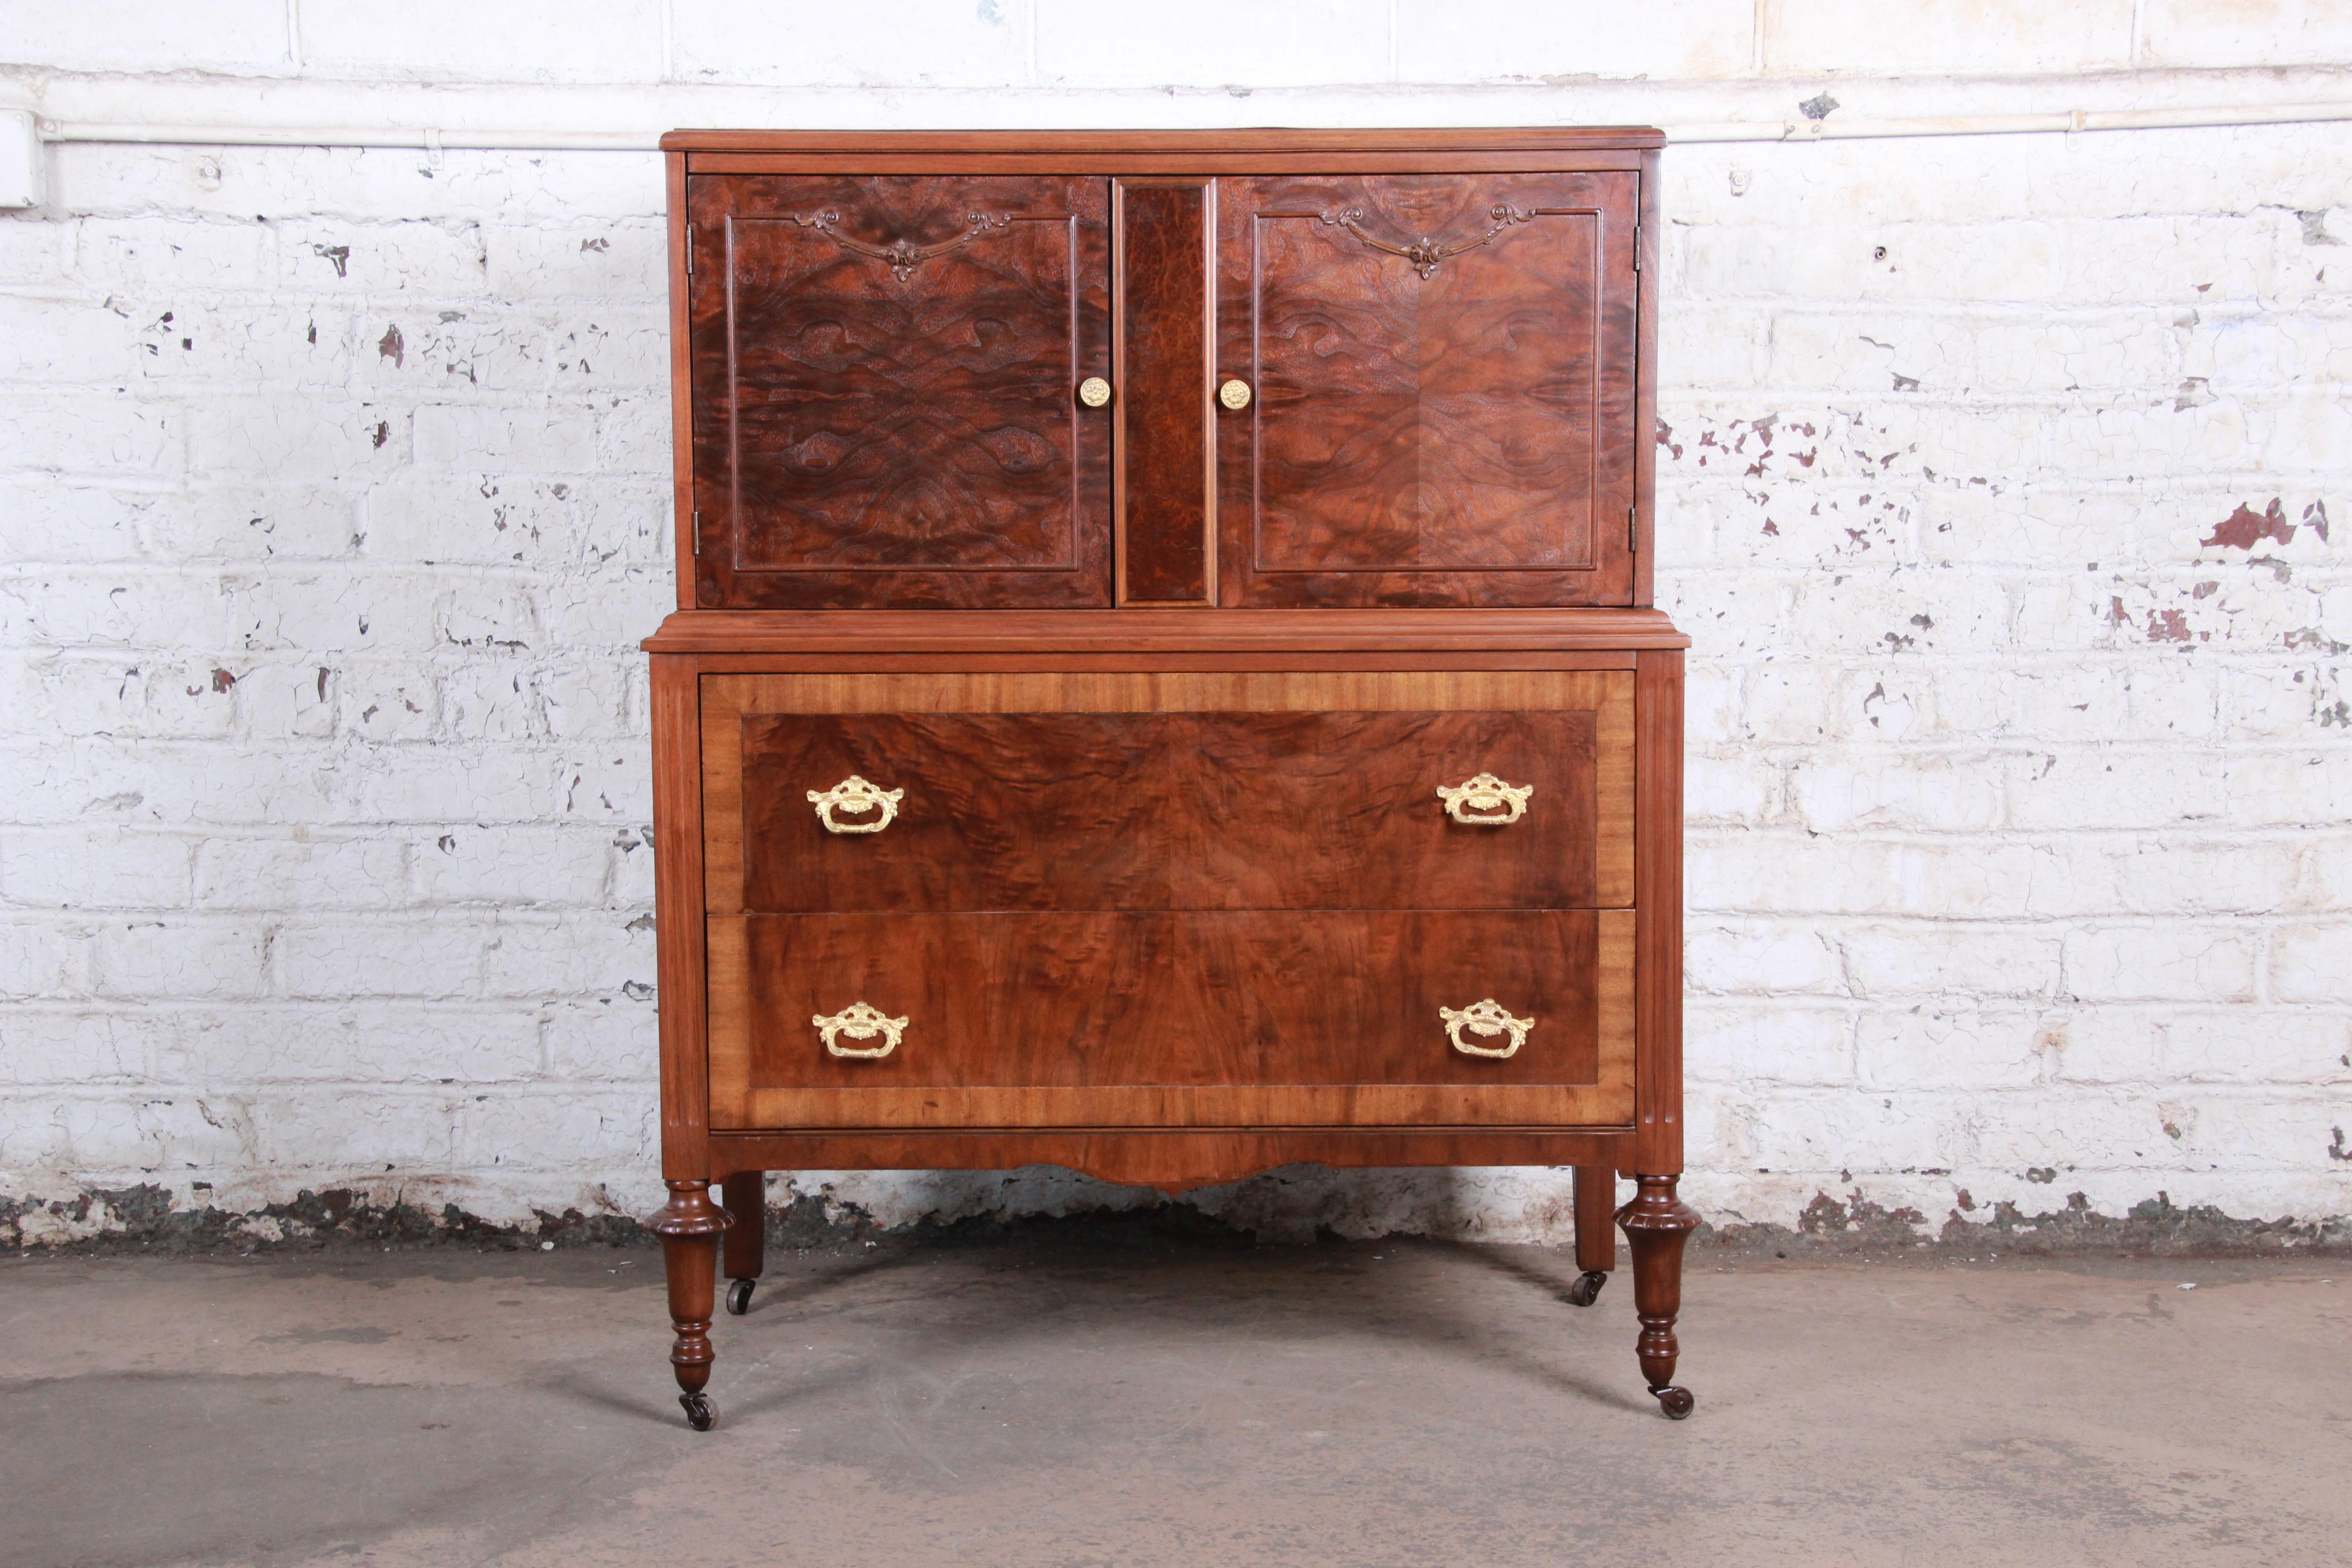 An extremely rare and exceptional walnut gentleman's chest from 